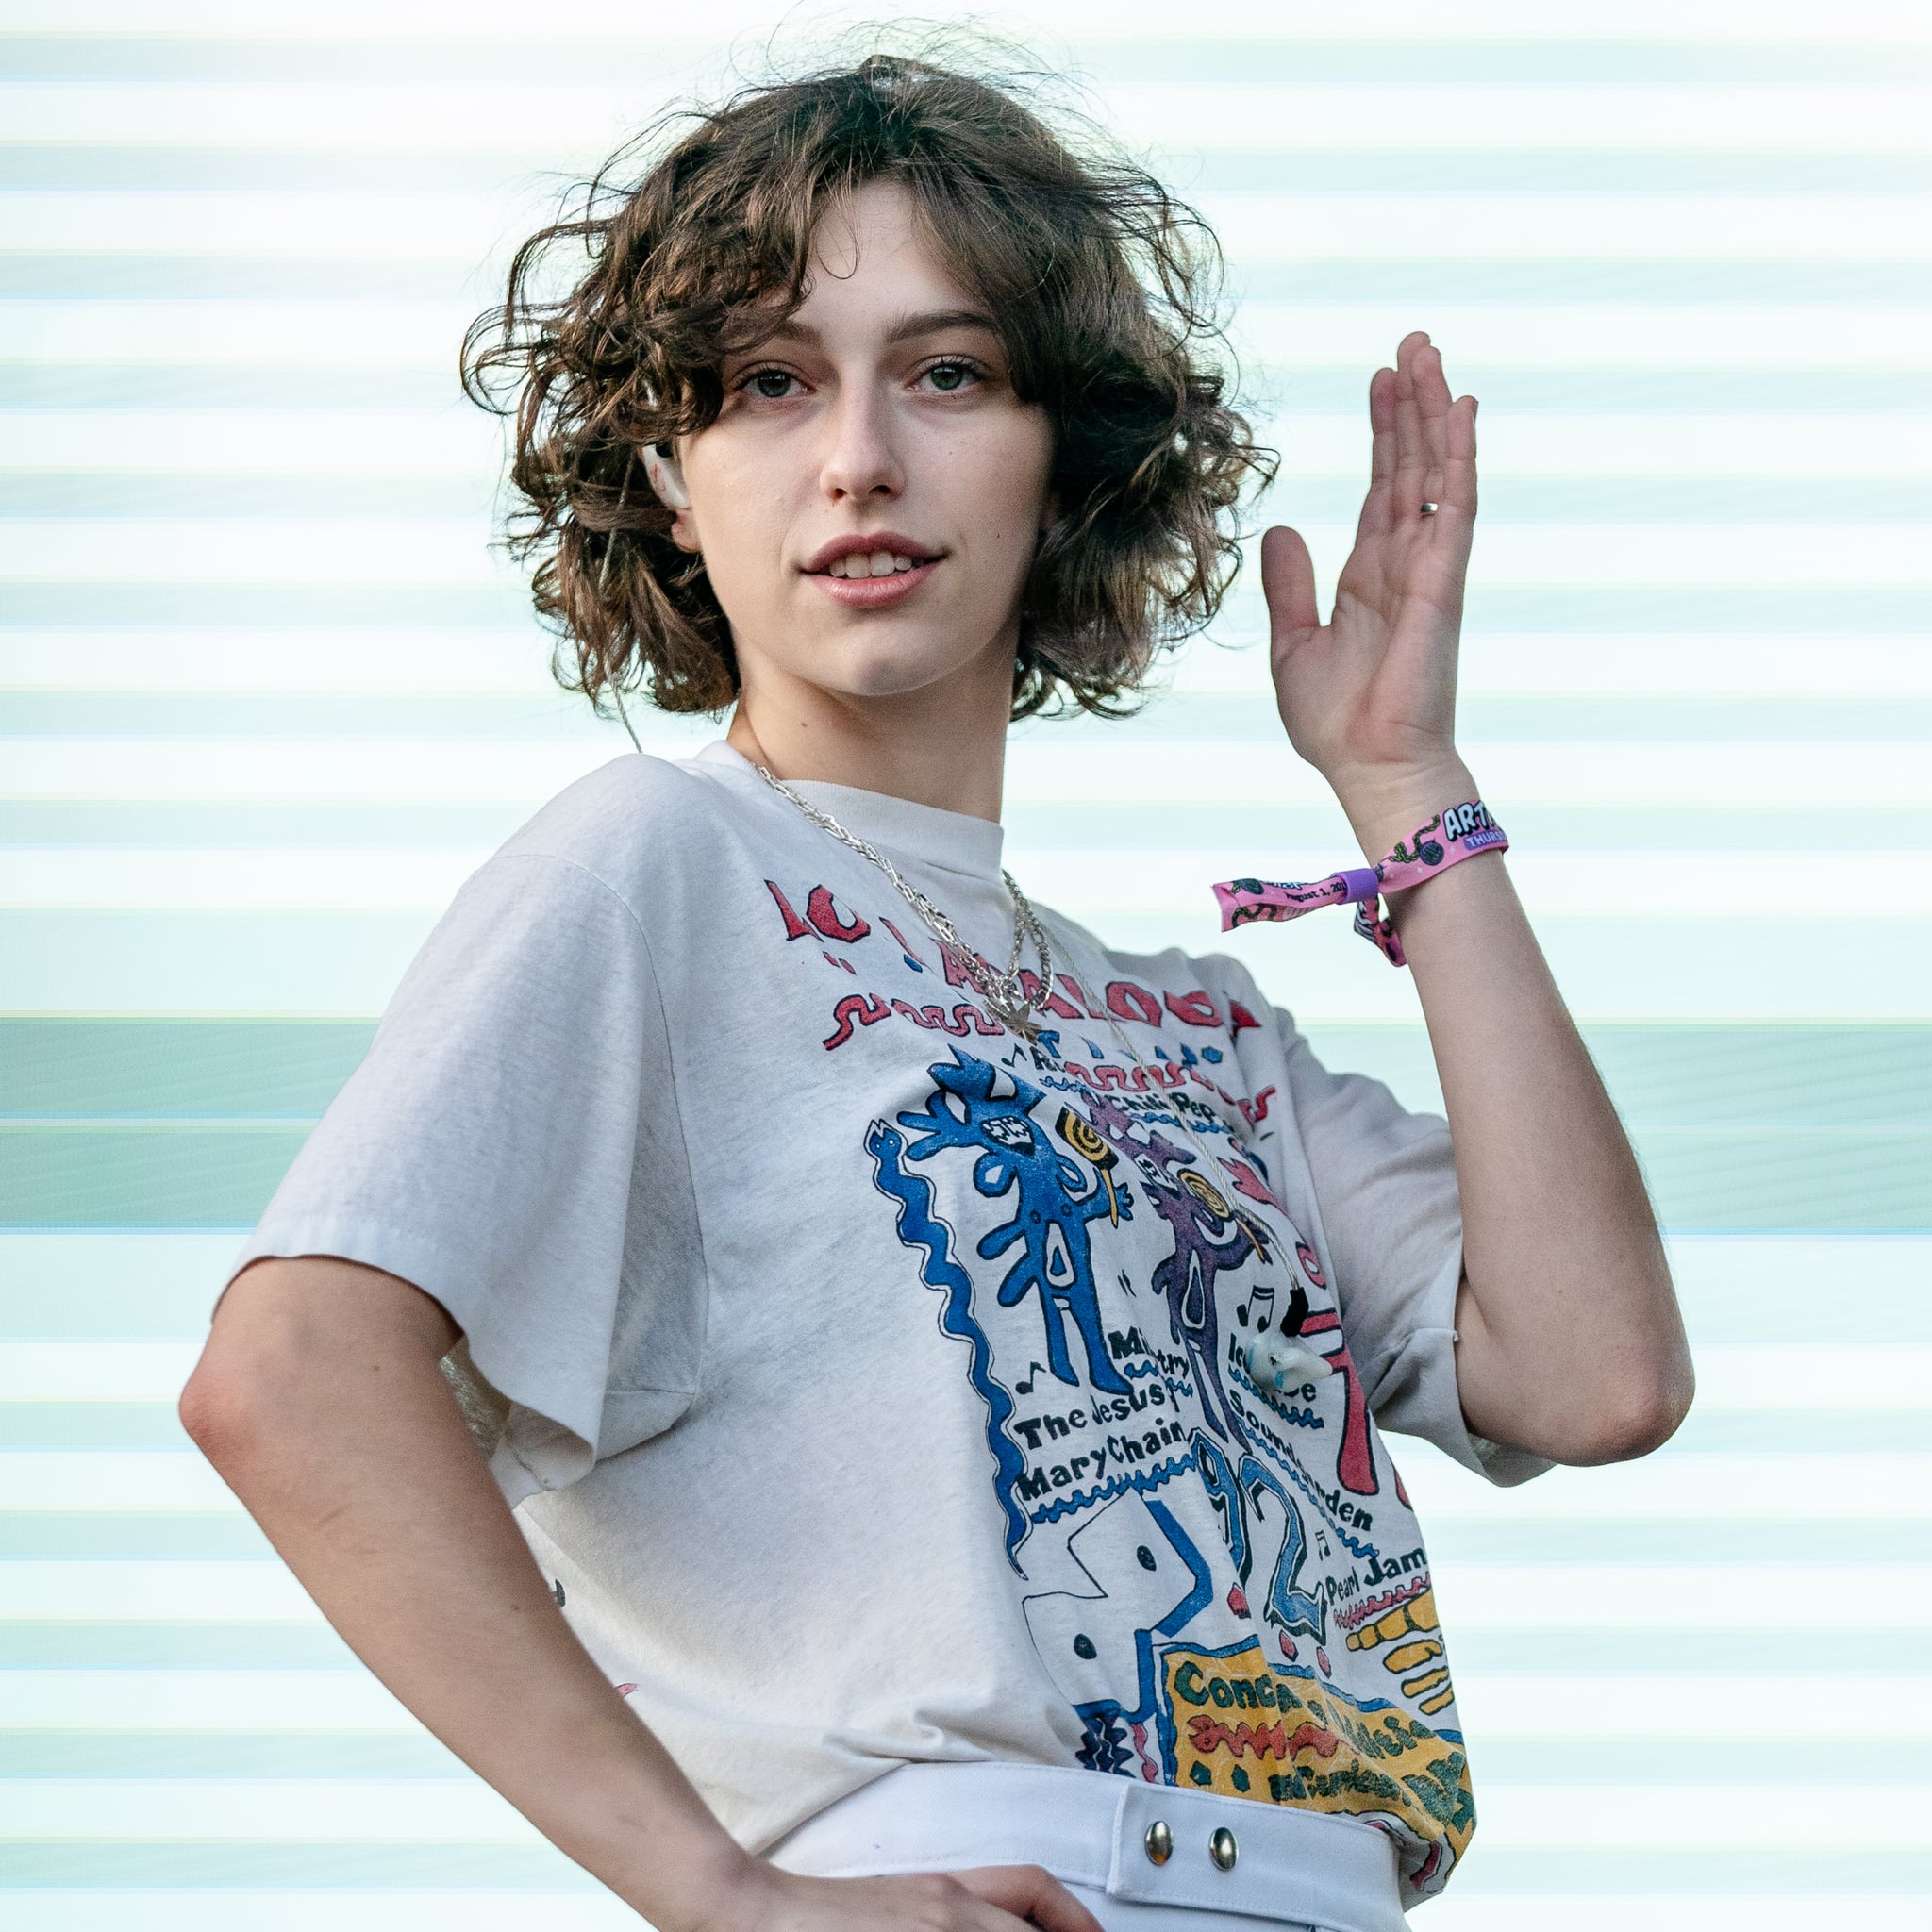 King Princess on Makeup Products She's Bringing on Tour | POPSUGAR Beauty